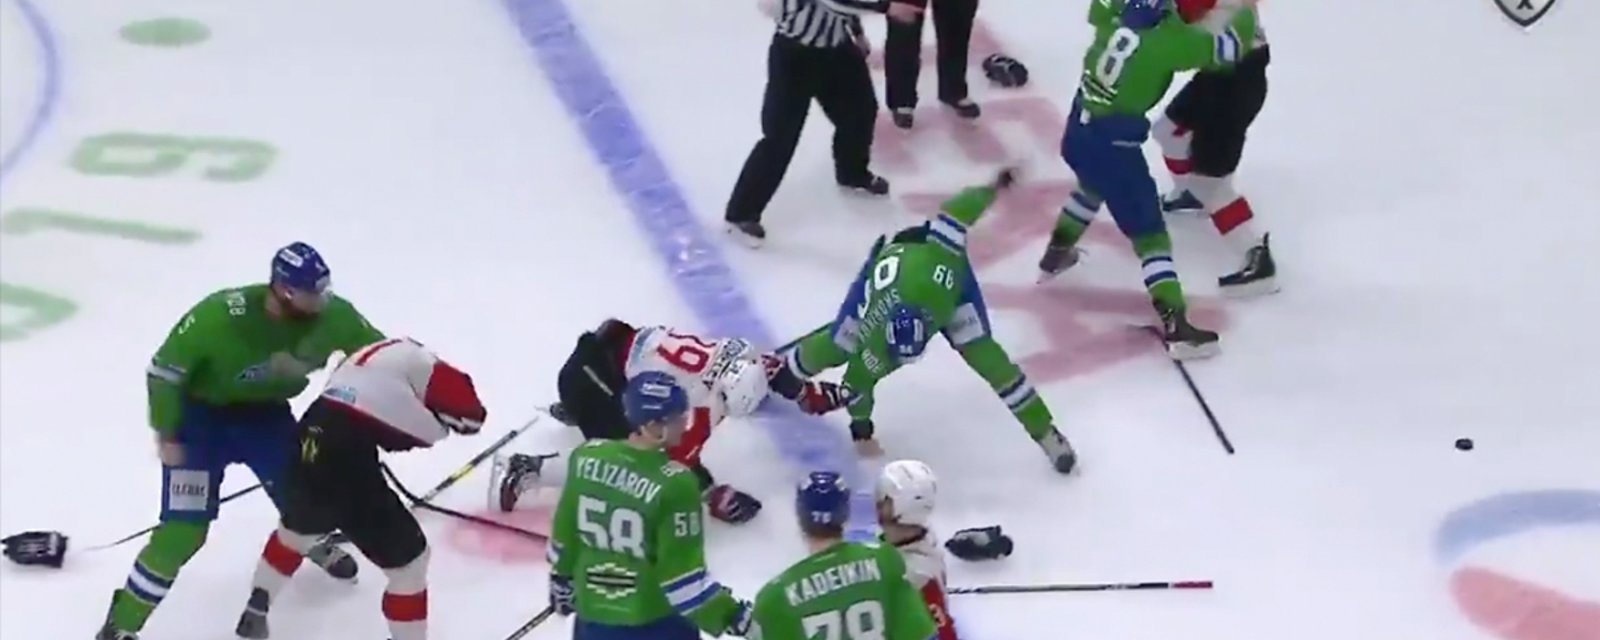 Huge line brawl breaks out in dying seconds of KHL playoff game